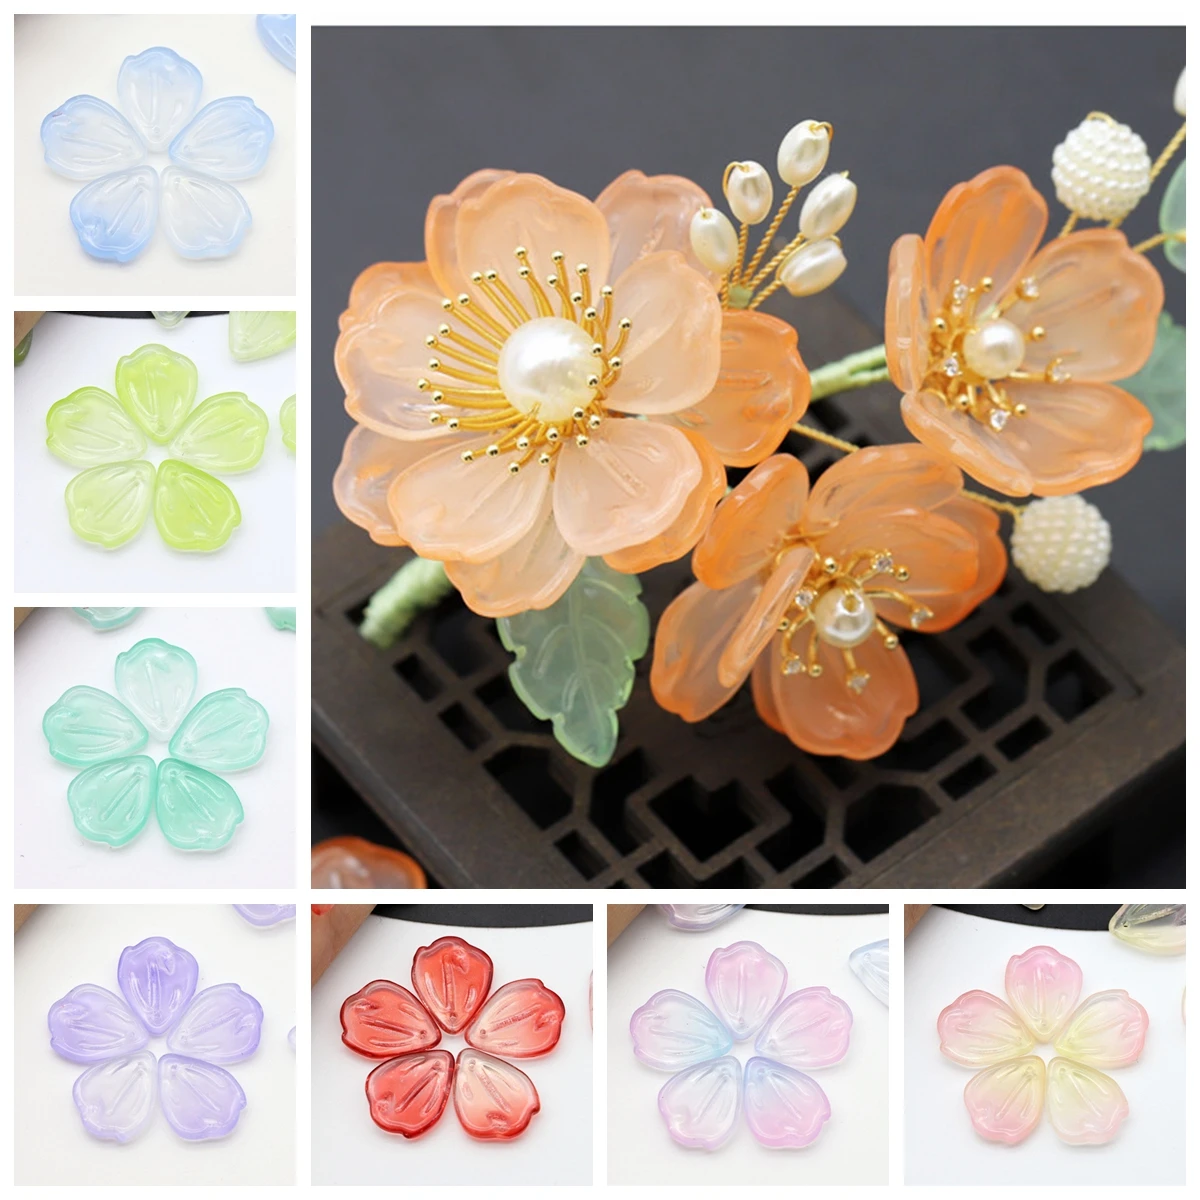 10pcs 19x16mm Petal Shape Handmade Lampwork Glass Loose Pendants Beads for Jewelry Making DIY Flower Findings 5pcs 14mm flat round chinese characters double happiness lampwork glass loose beads for jewelry making diy crafts findings